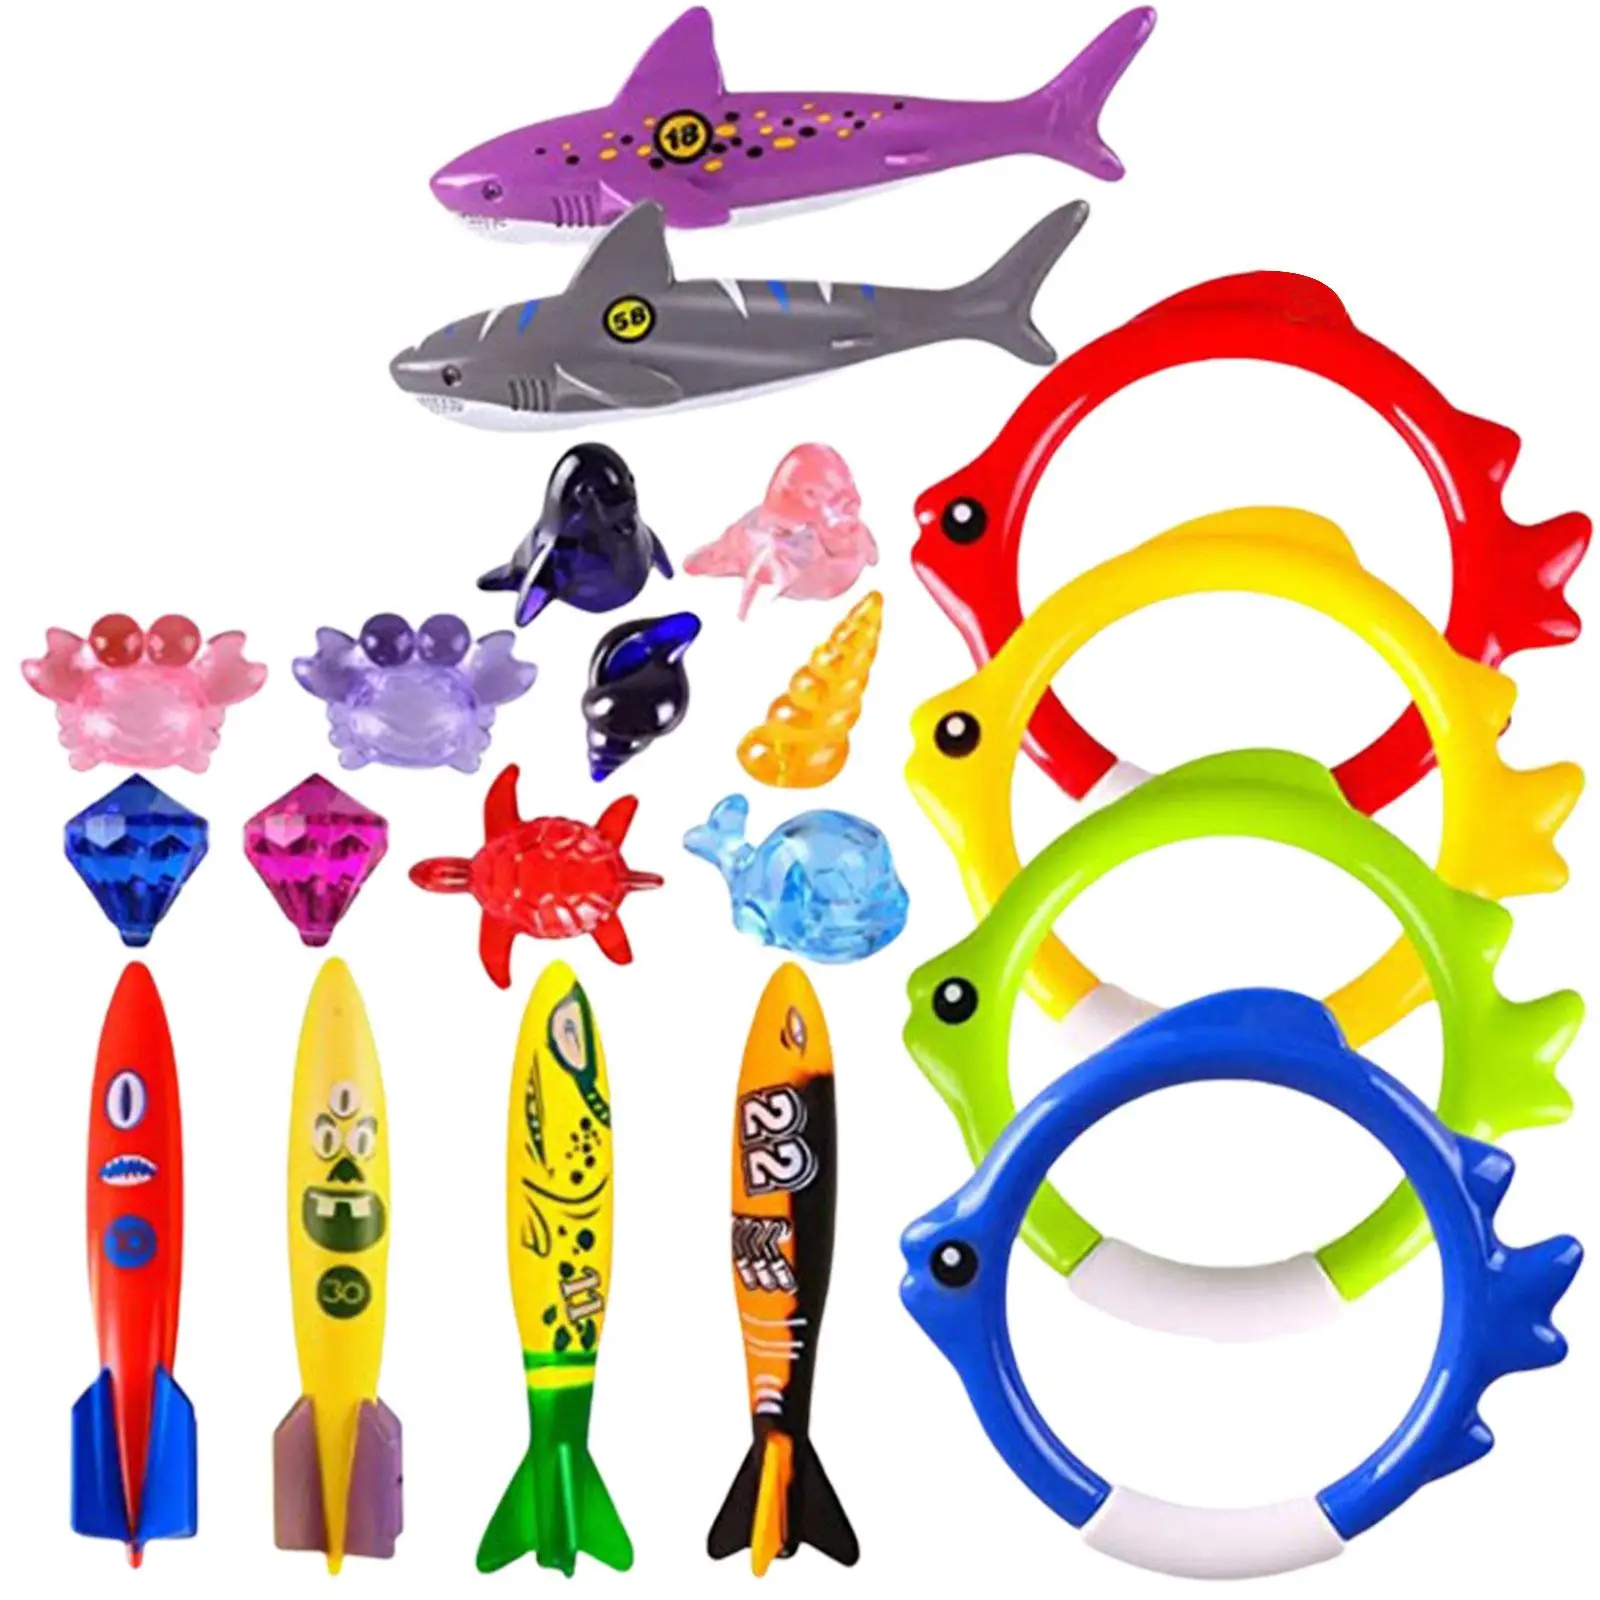 

20x Toddler Pool Toys Sea Animals Sports Activity Toys Underwater Dive Gifts for Diving Practice Schools Beach Pool